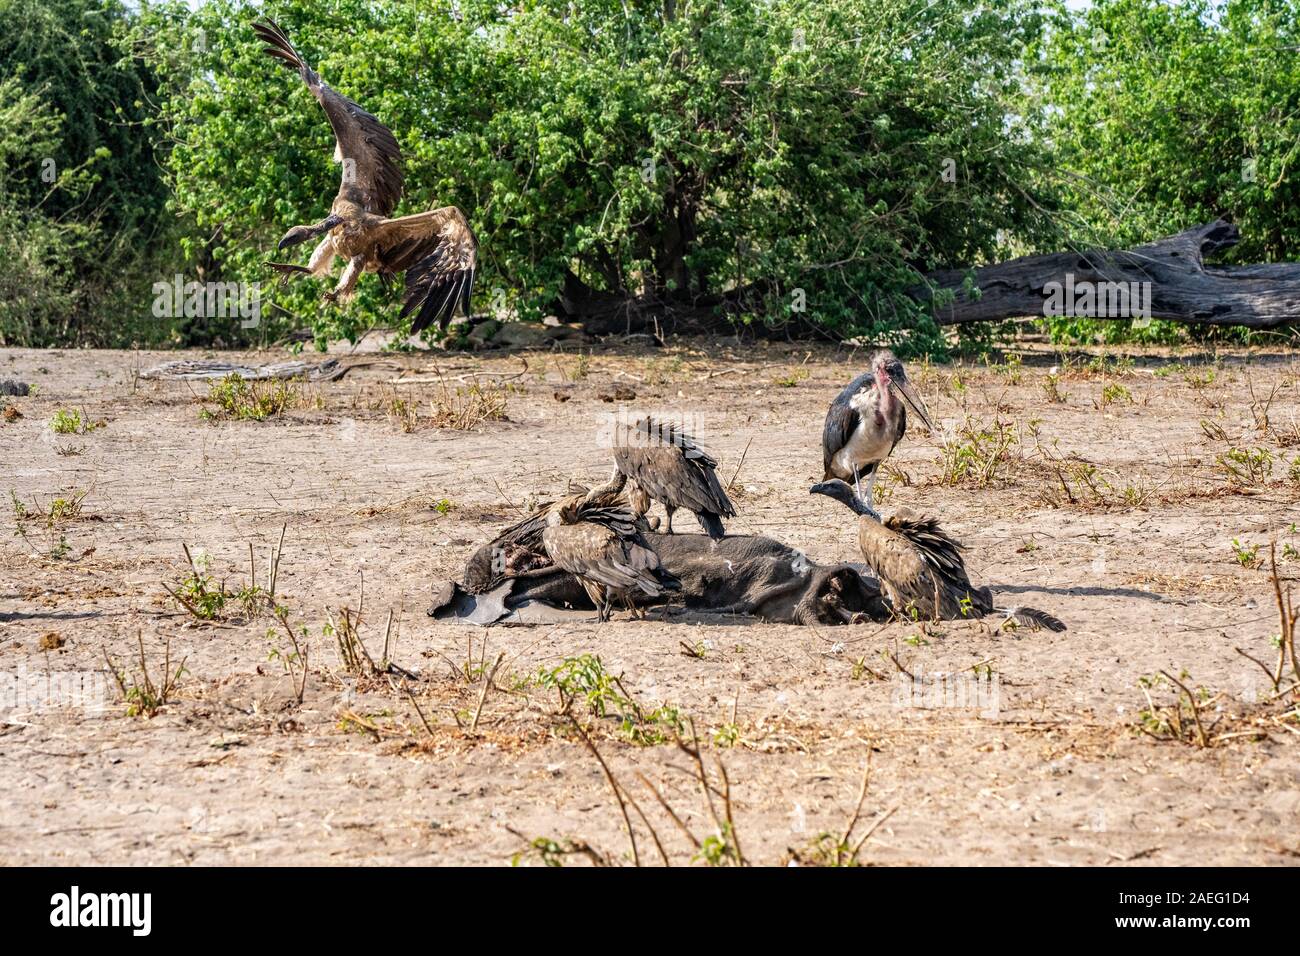 A carcass of a dead elephant is eaten by white-backed vultures (Gyps africanus) and marabou storks (Leptoptilos crumenigerus). Photographed at Hwange Stock Photo